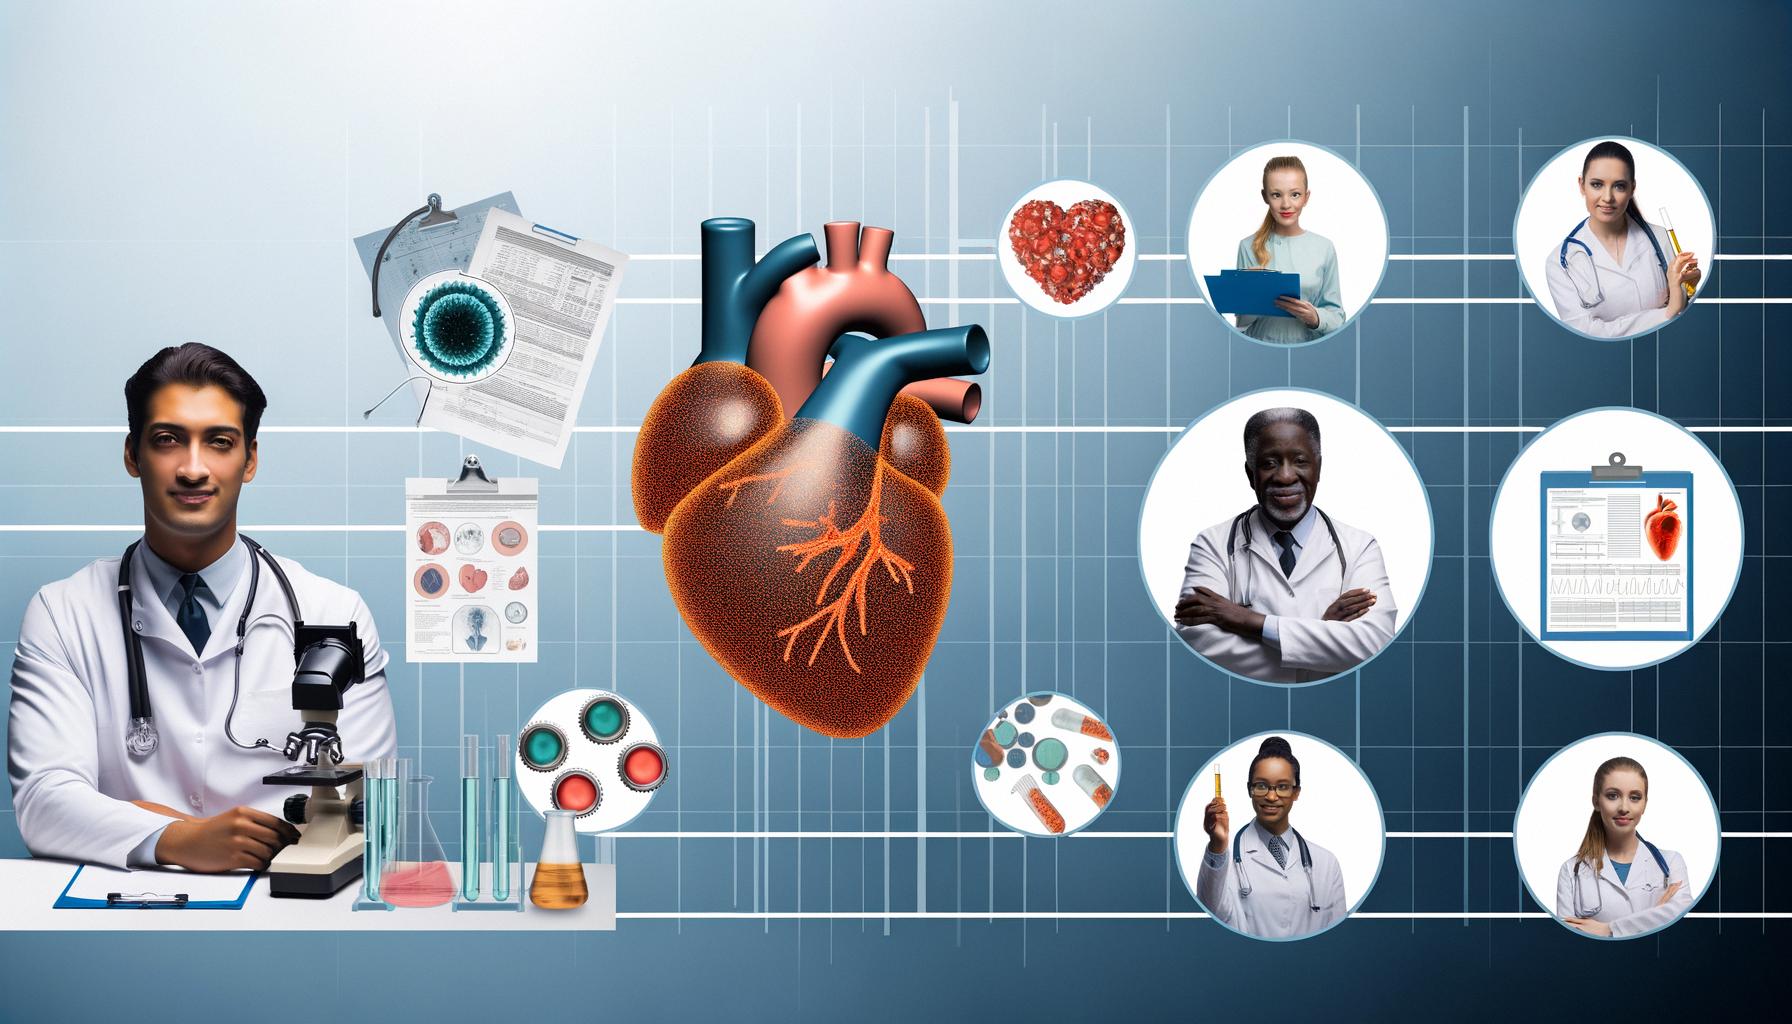 Recent innovations and discoveries in heart disease research impact treatment and risk factors Balanced News